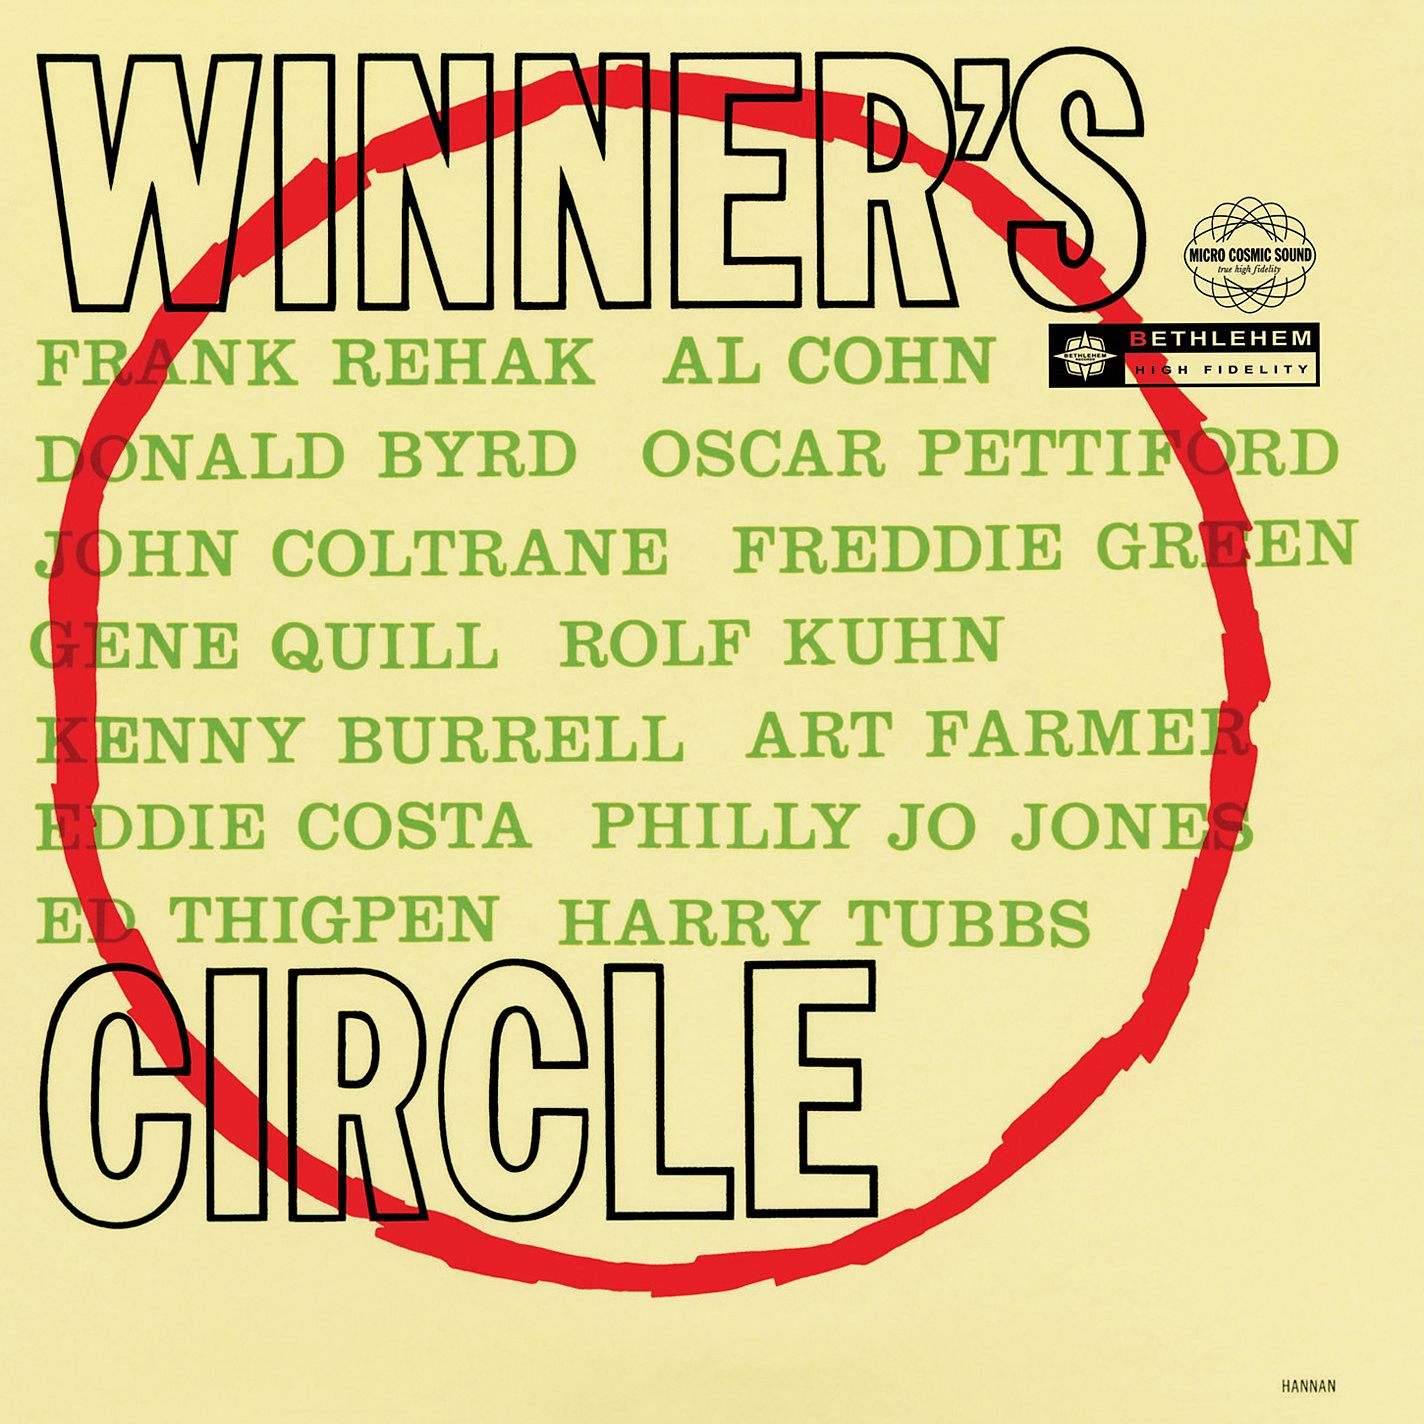 Various Artists – In The Winner’s Circle (1958/2013) [PrestoClassical FLAC 24bit/96kHz]